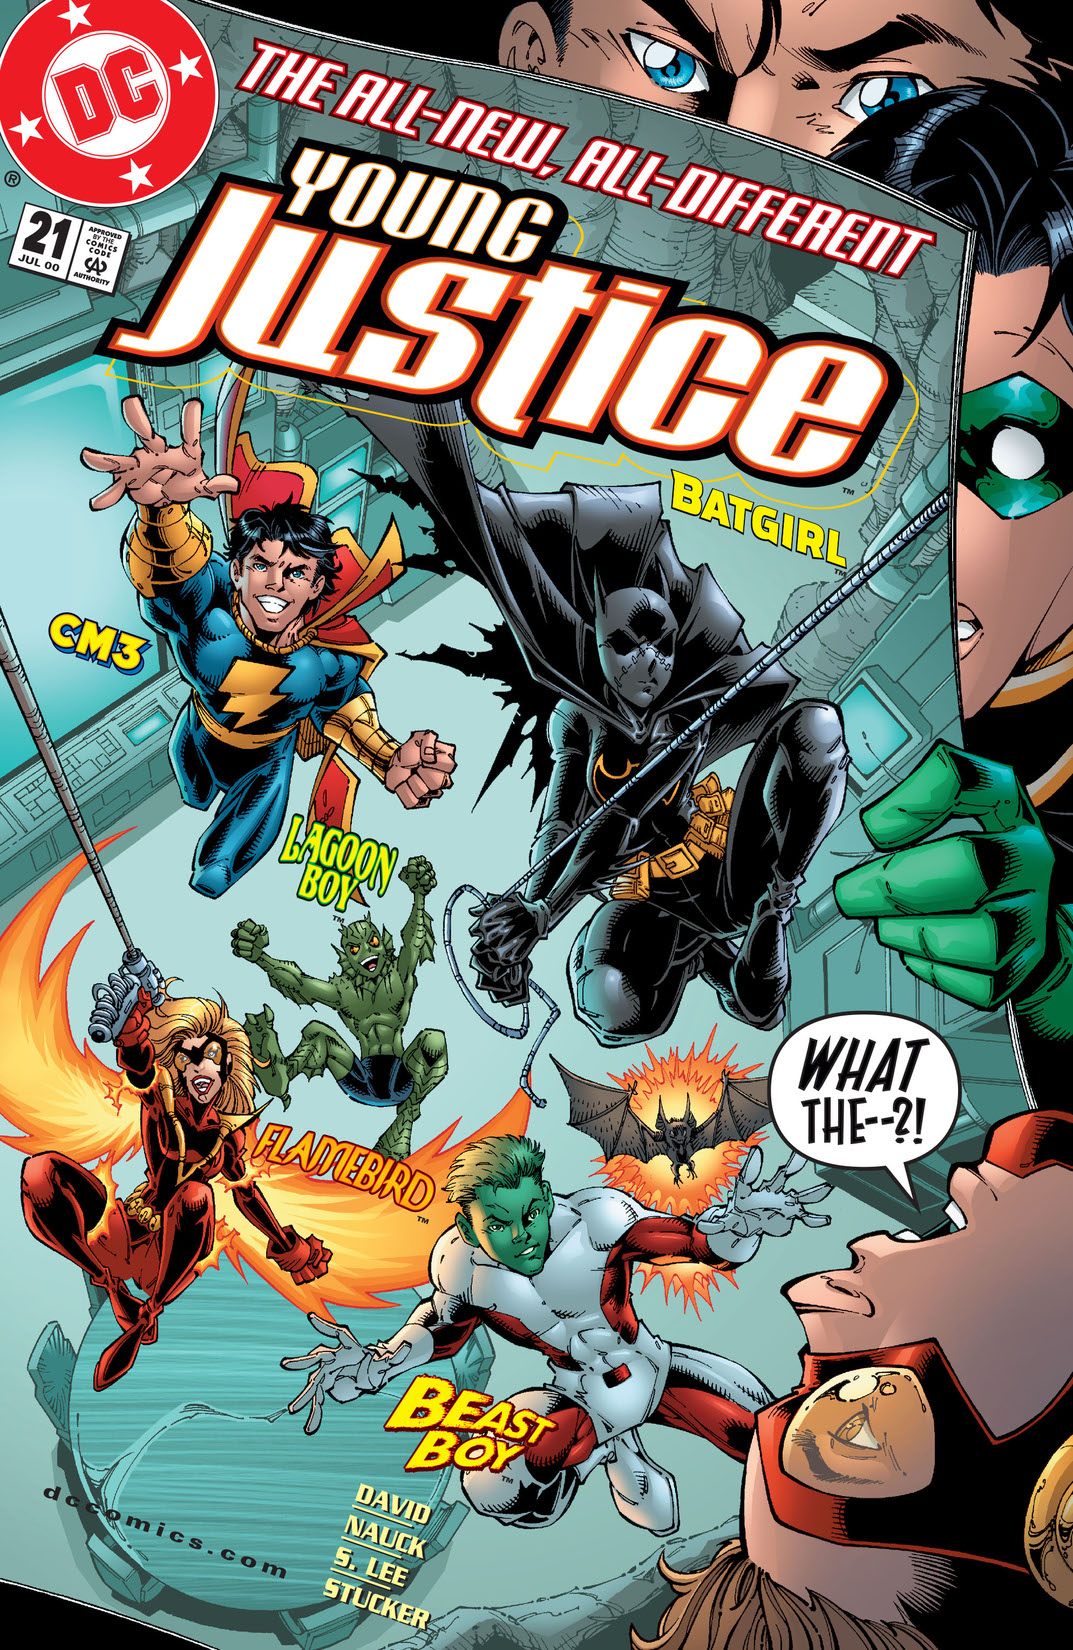 Young Justice (1998-) #21 preview images